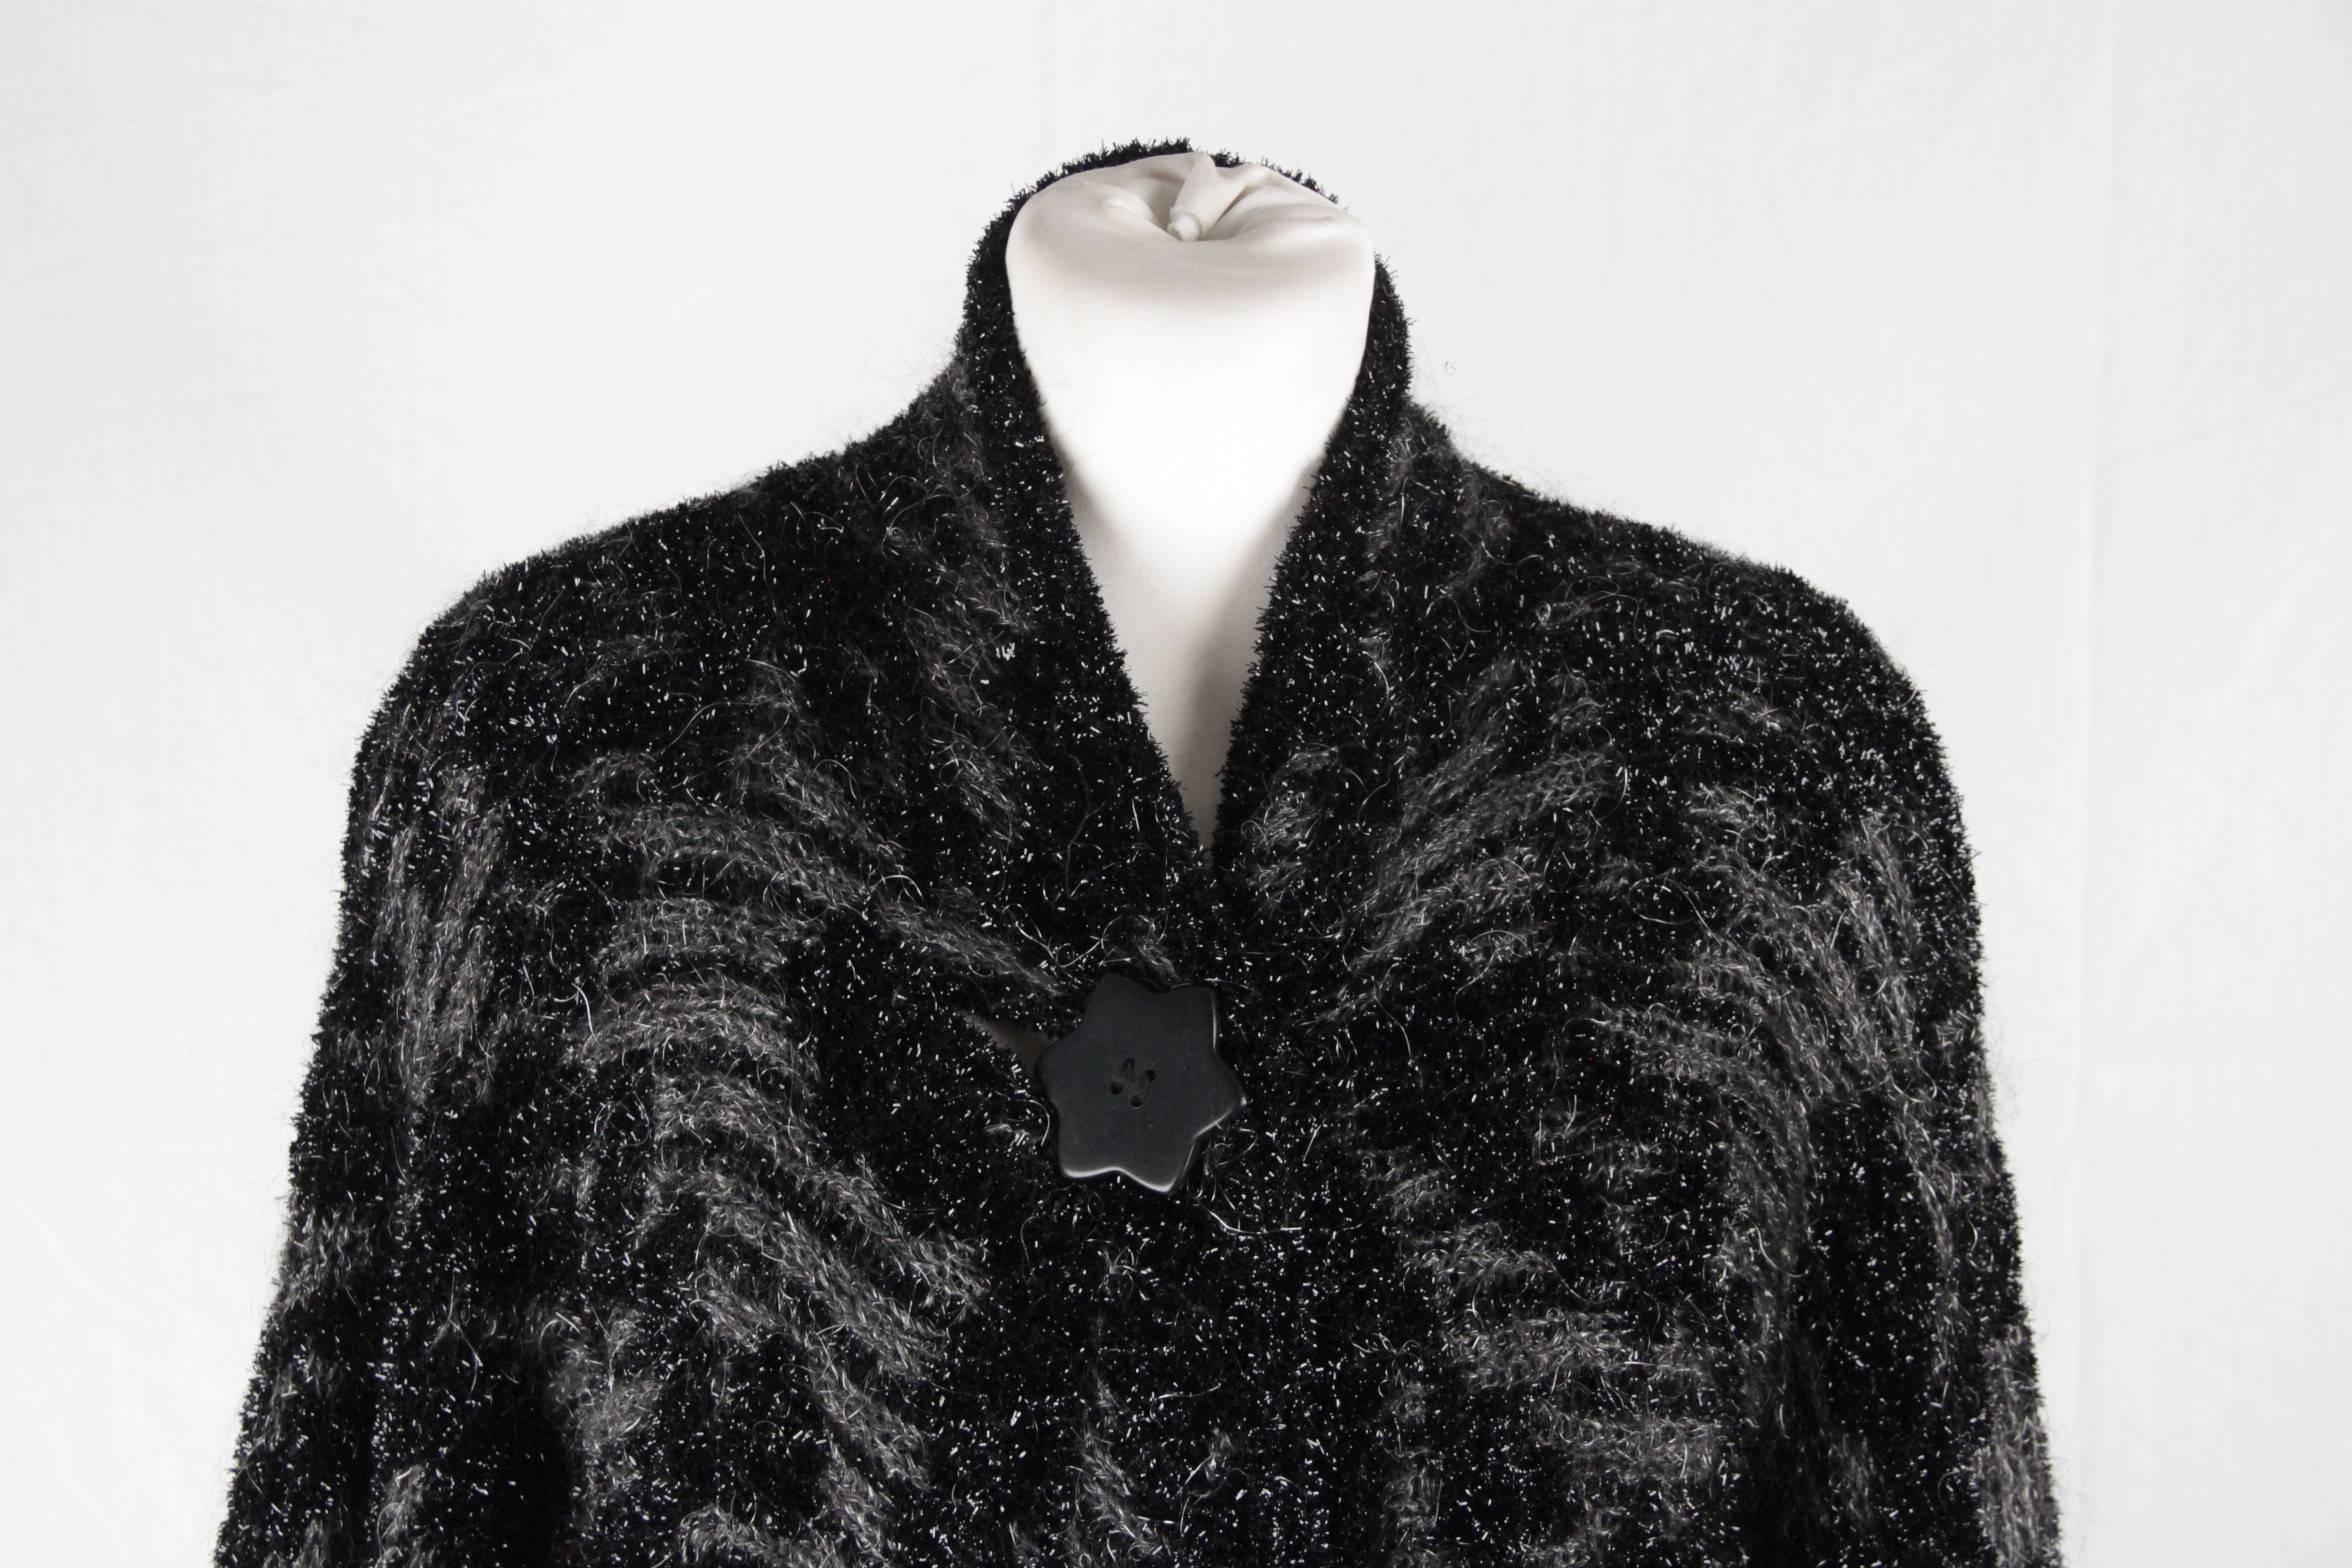 
- Composition: 76% Nylon, 14% Wool, 10% Mohair
- Knitted bouclé
- Metallic effect
- Big button closing on the neckline
- Oversized design
- side pockets
- Unlined
- Size: S (The size shown for this item is the size indicated by the